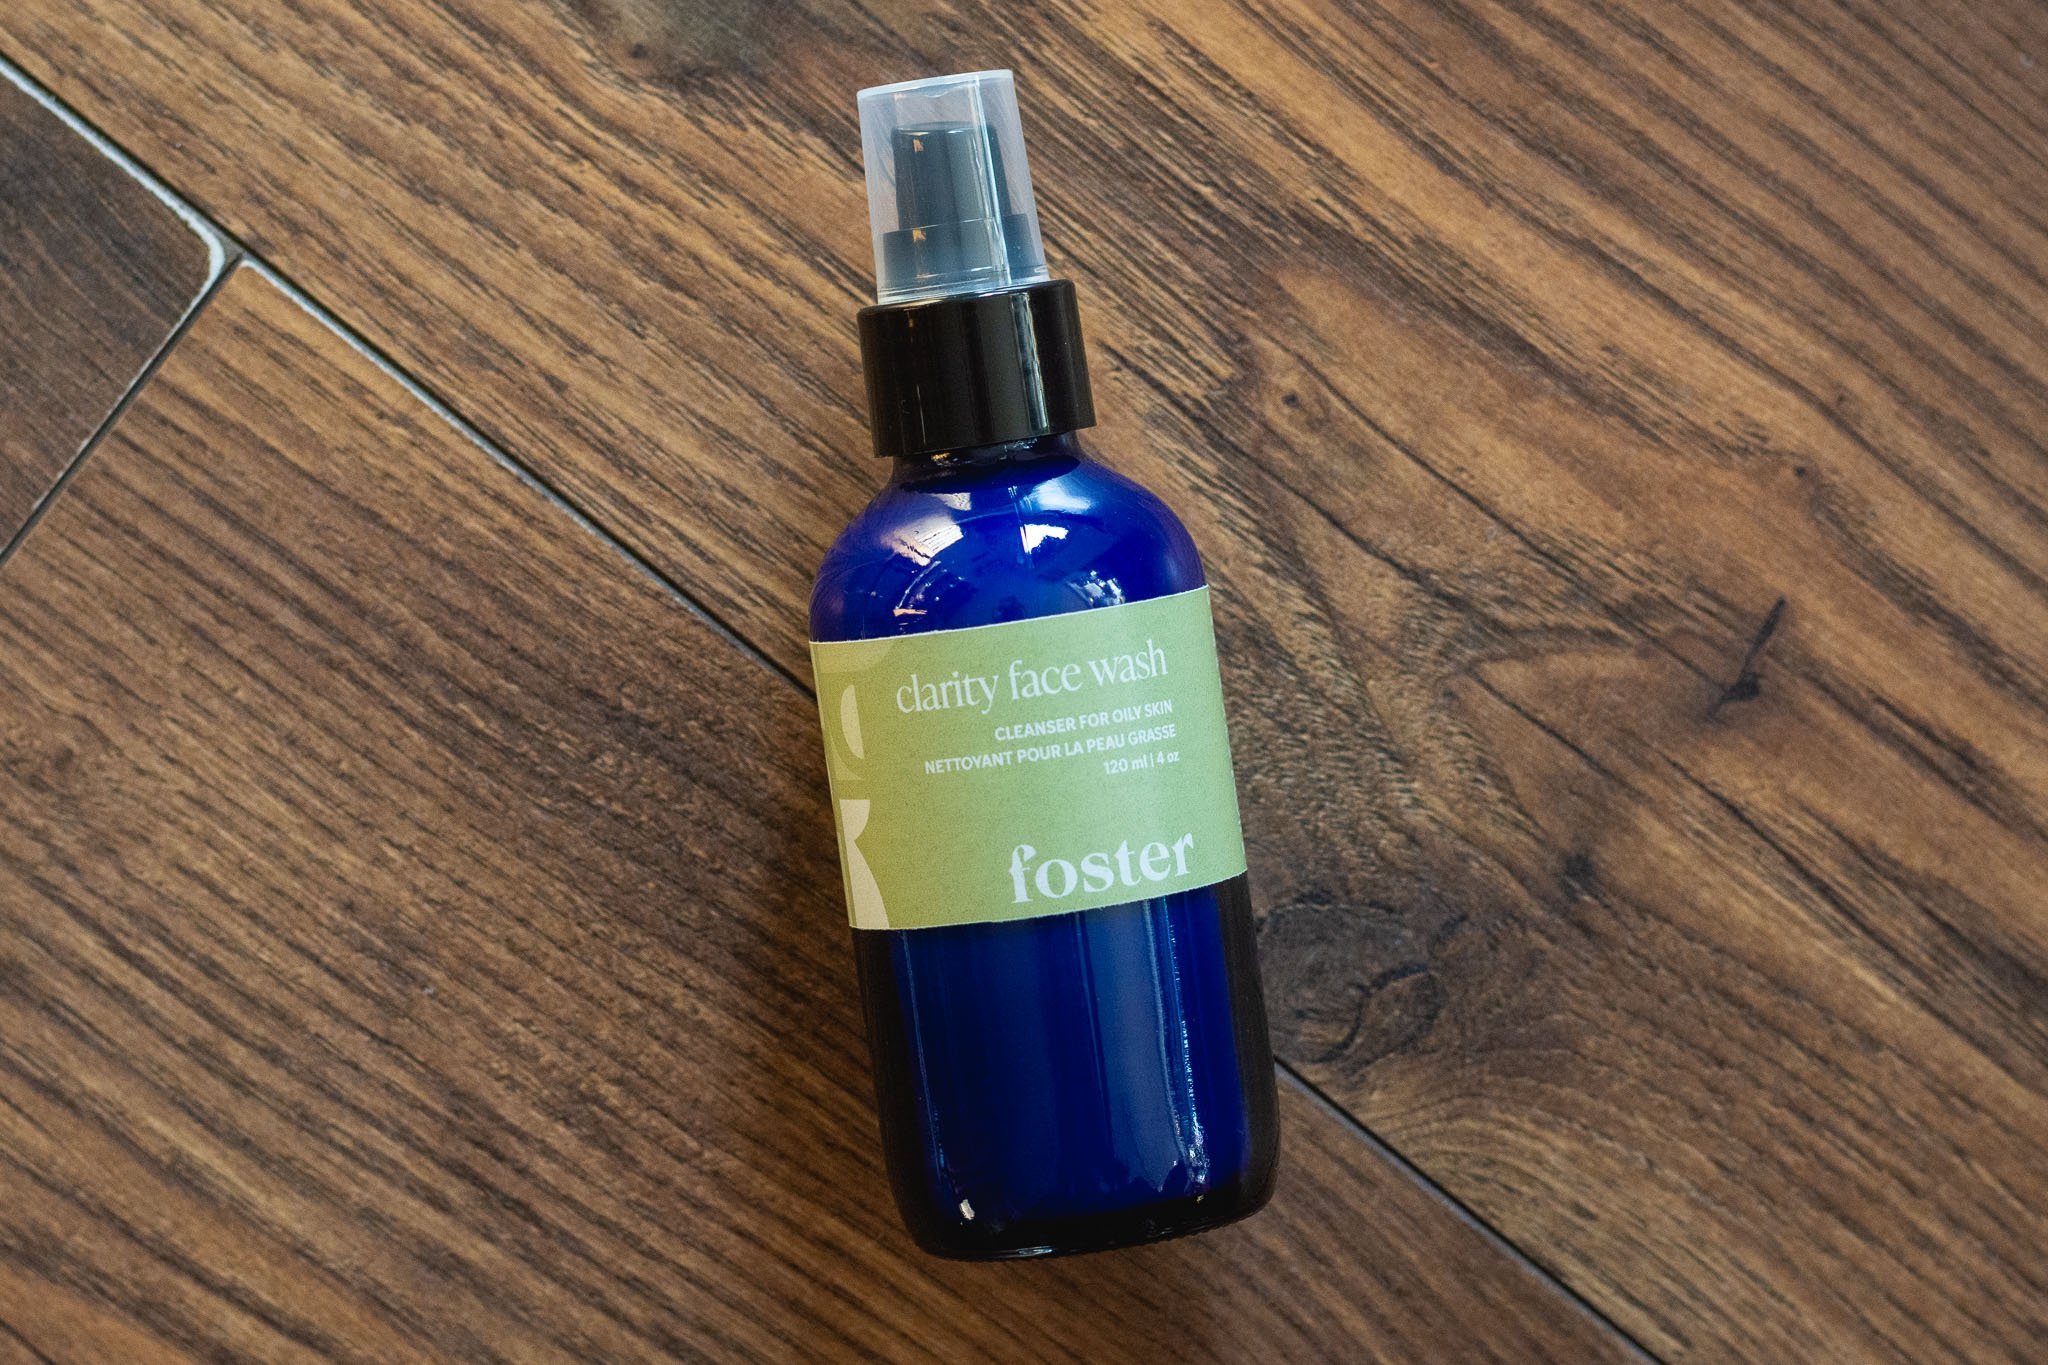 Clarity Face Wash by Foster